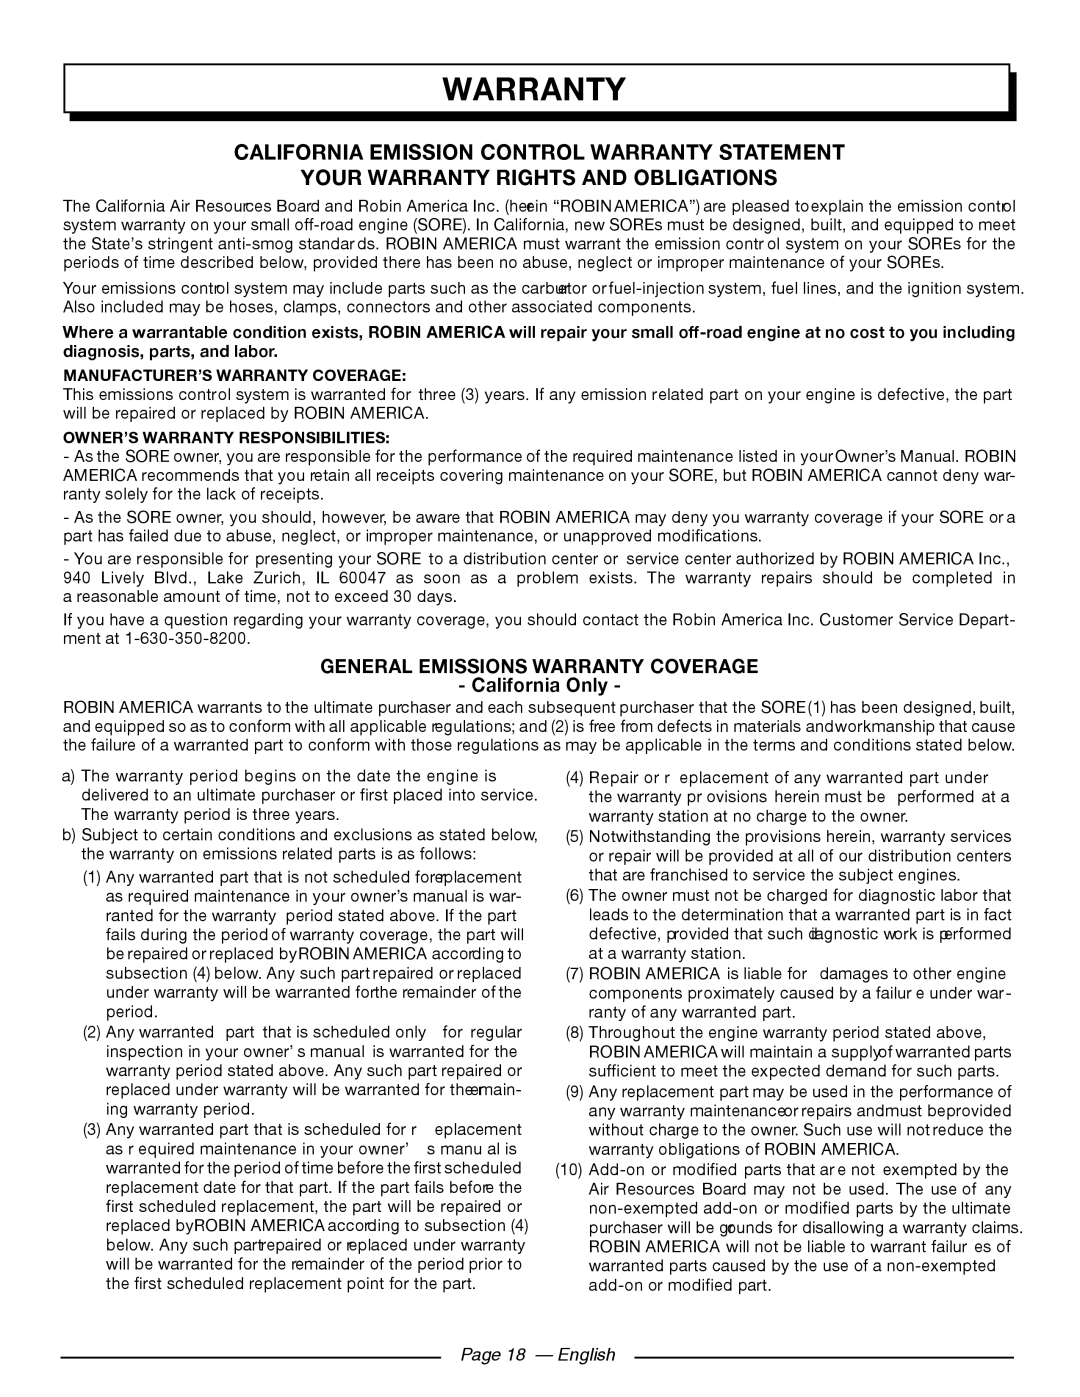 Homelite UT80911 California Emission Control Warranty Statement, Your Warranty Rights And Obligations, Page 18 - English 